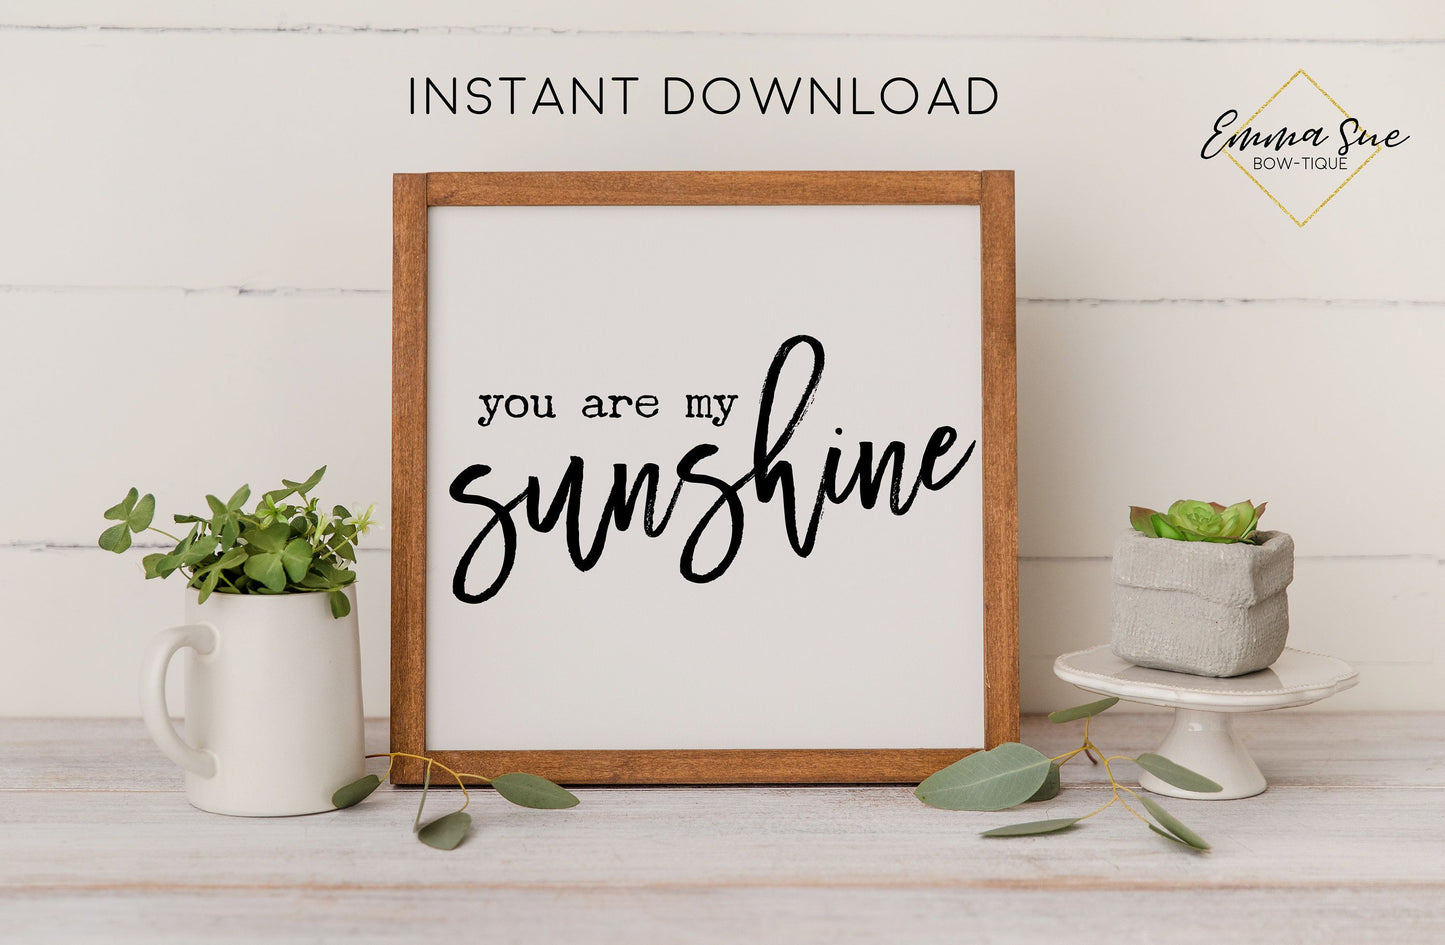 You are my Sunshine - Love Kindness Quotes Kid's Room Printable Sign Wall Art